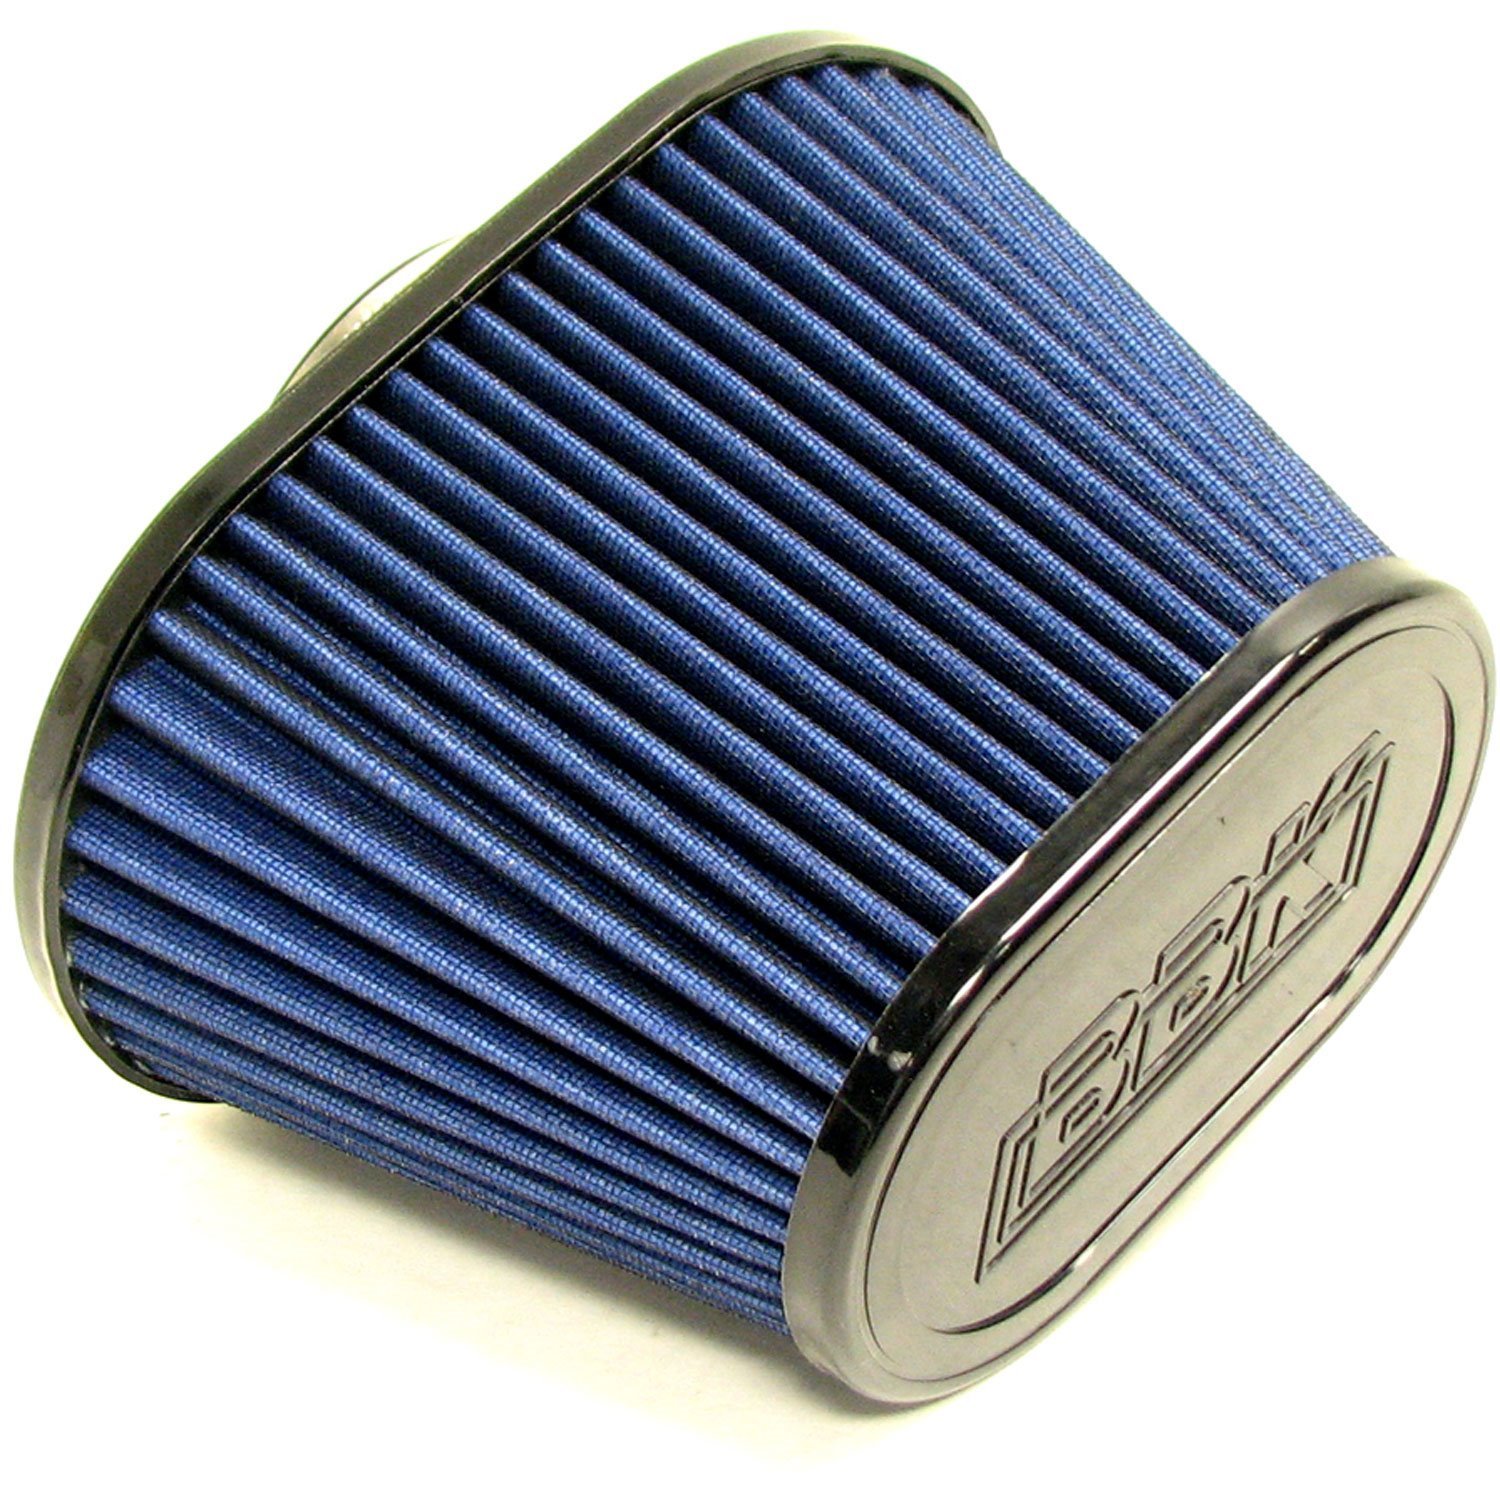 Conical Cold Air Intake Filter High Flow Washable Cotton Element For BBK Cold Air Kits: